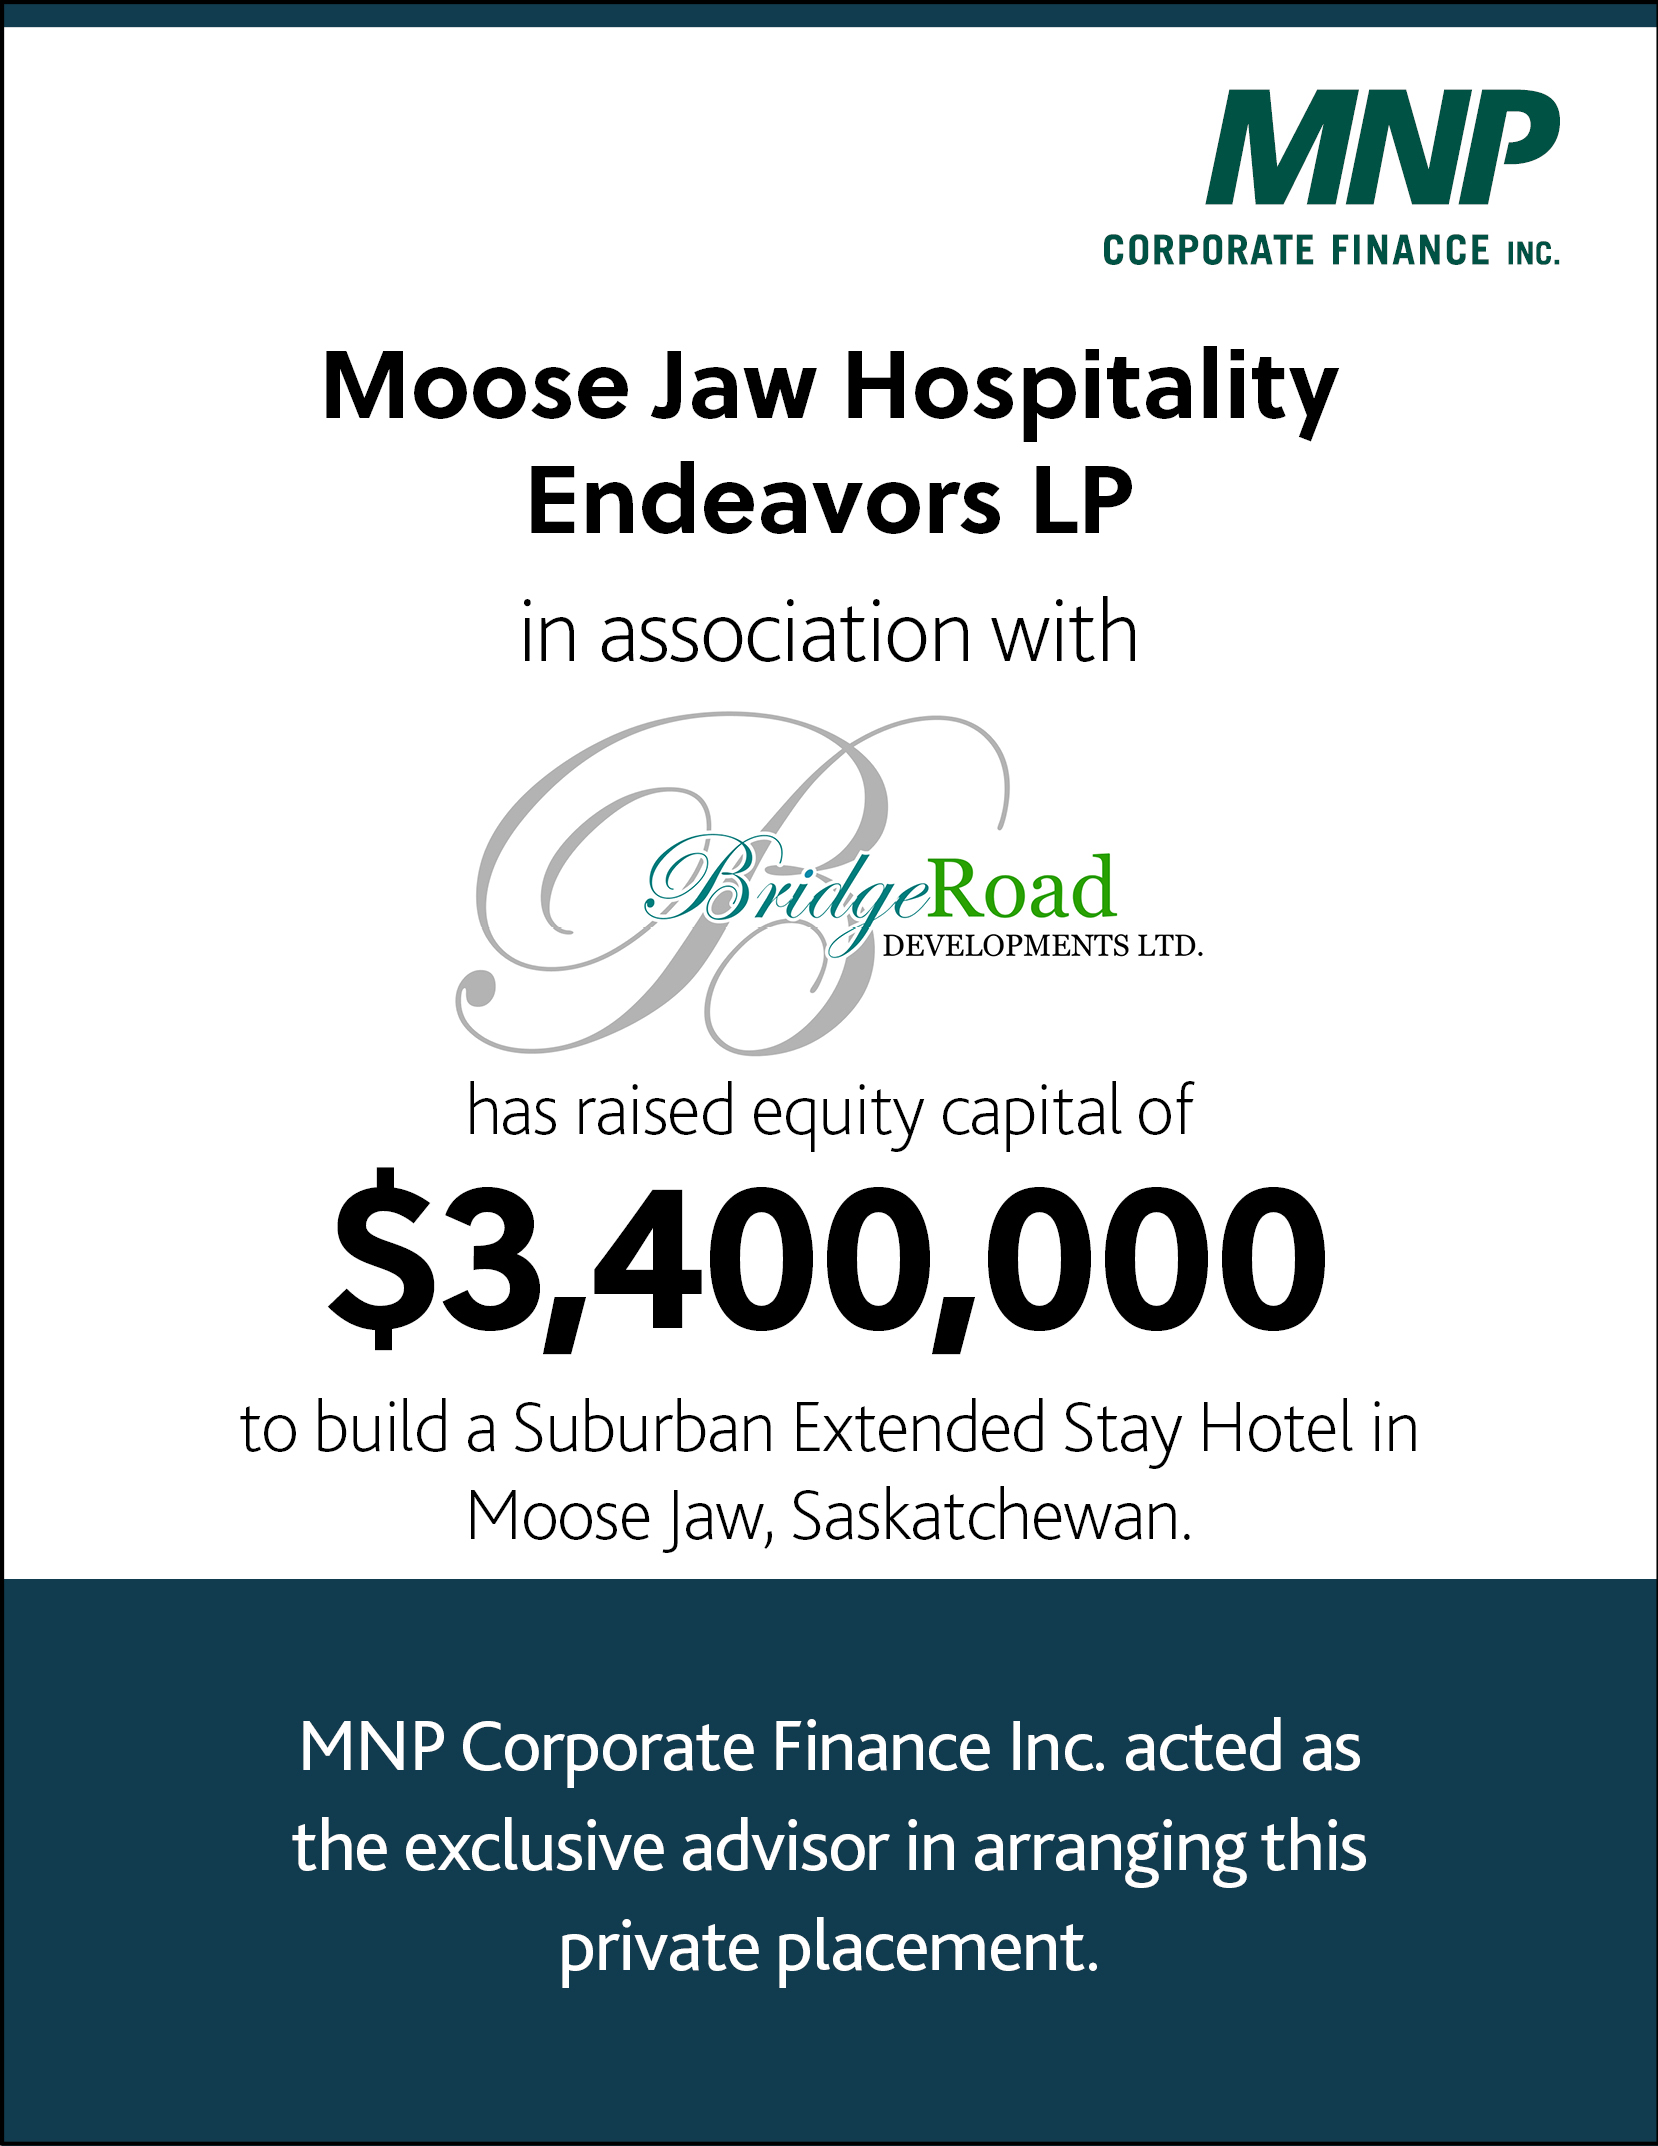 Moose Jaw Hospitality Endeavors LP in association with Bridge Road Developments Ltd. had raised equity capital of $3,400,000 to build a suburban extended stay hotel in Moose Jaw, Saskatchewan